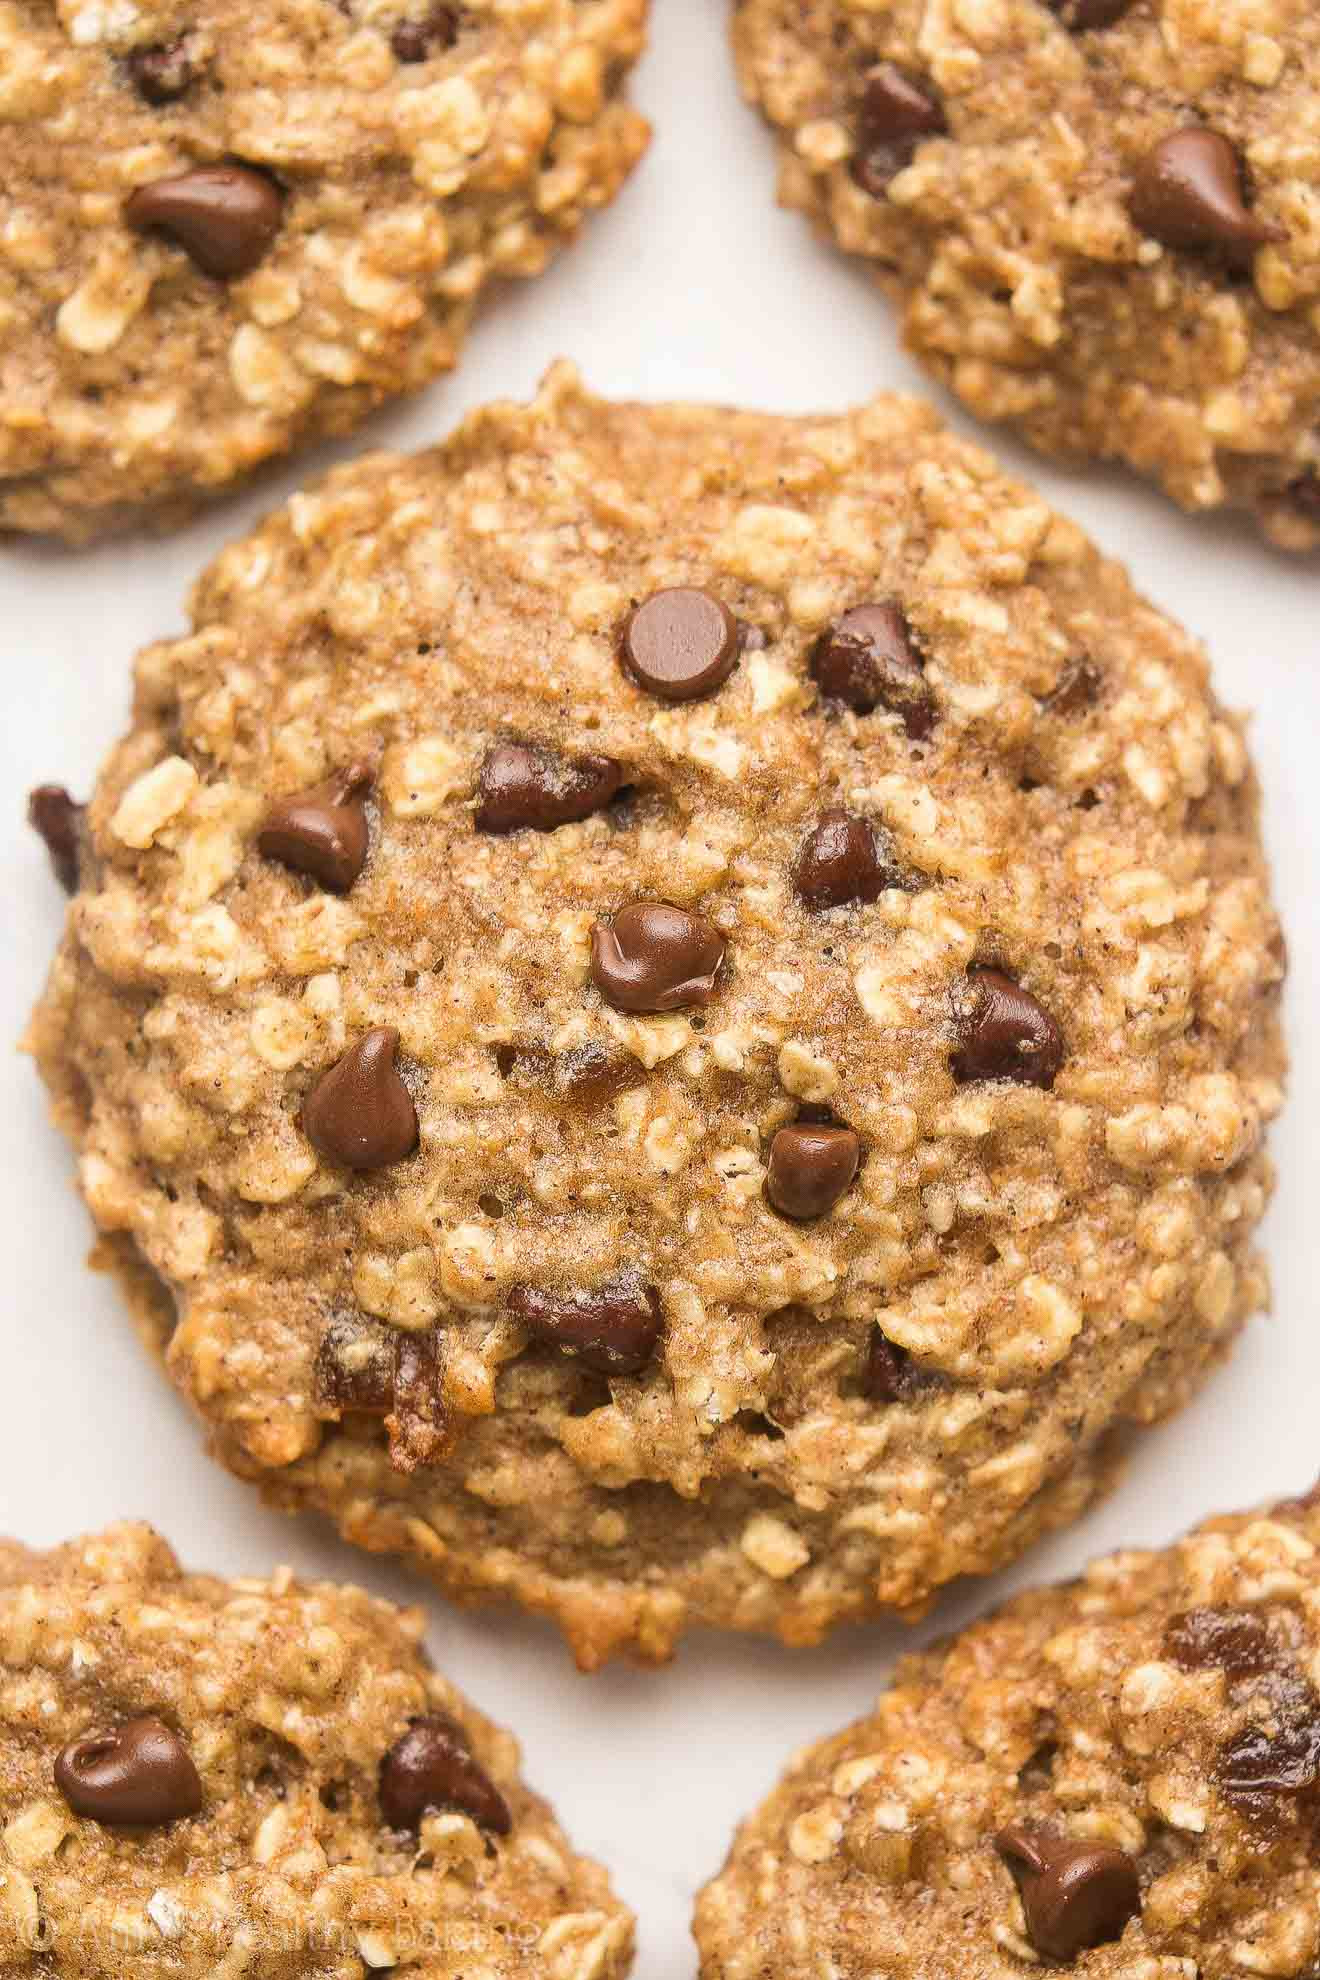 Choc Chip Oatmeal Cookies Healthy
 Healthy Caramel Chocolate Chip Oatmeal Cookies